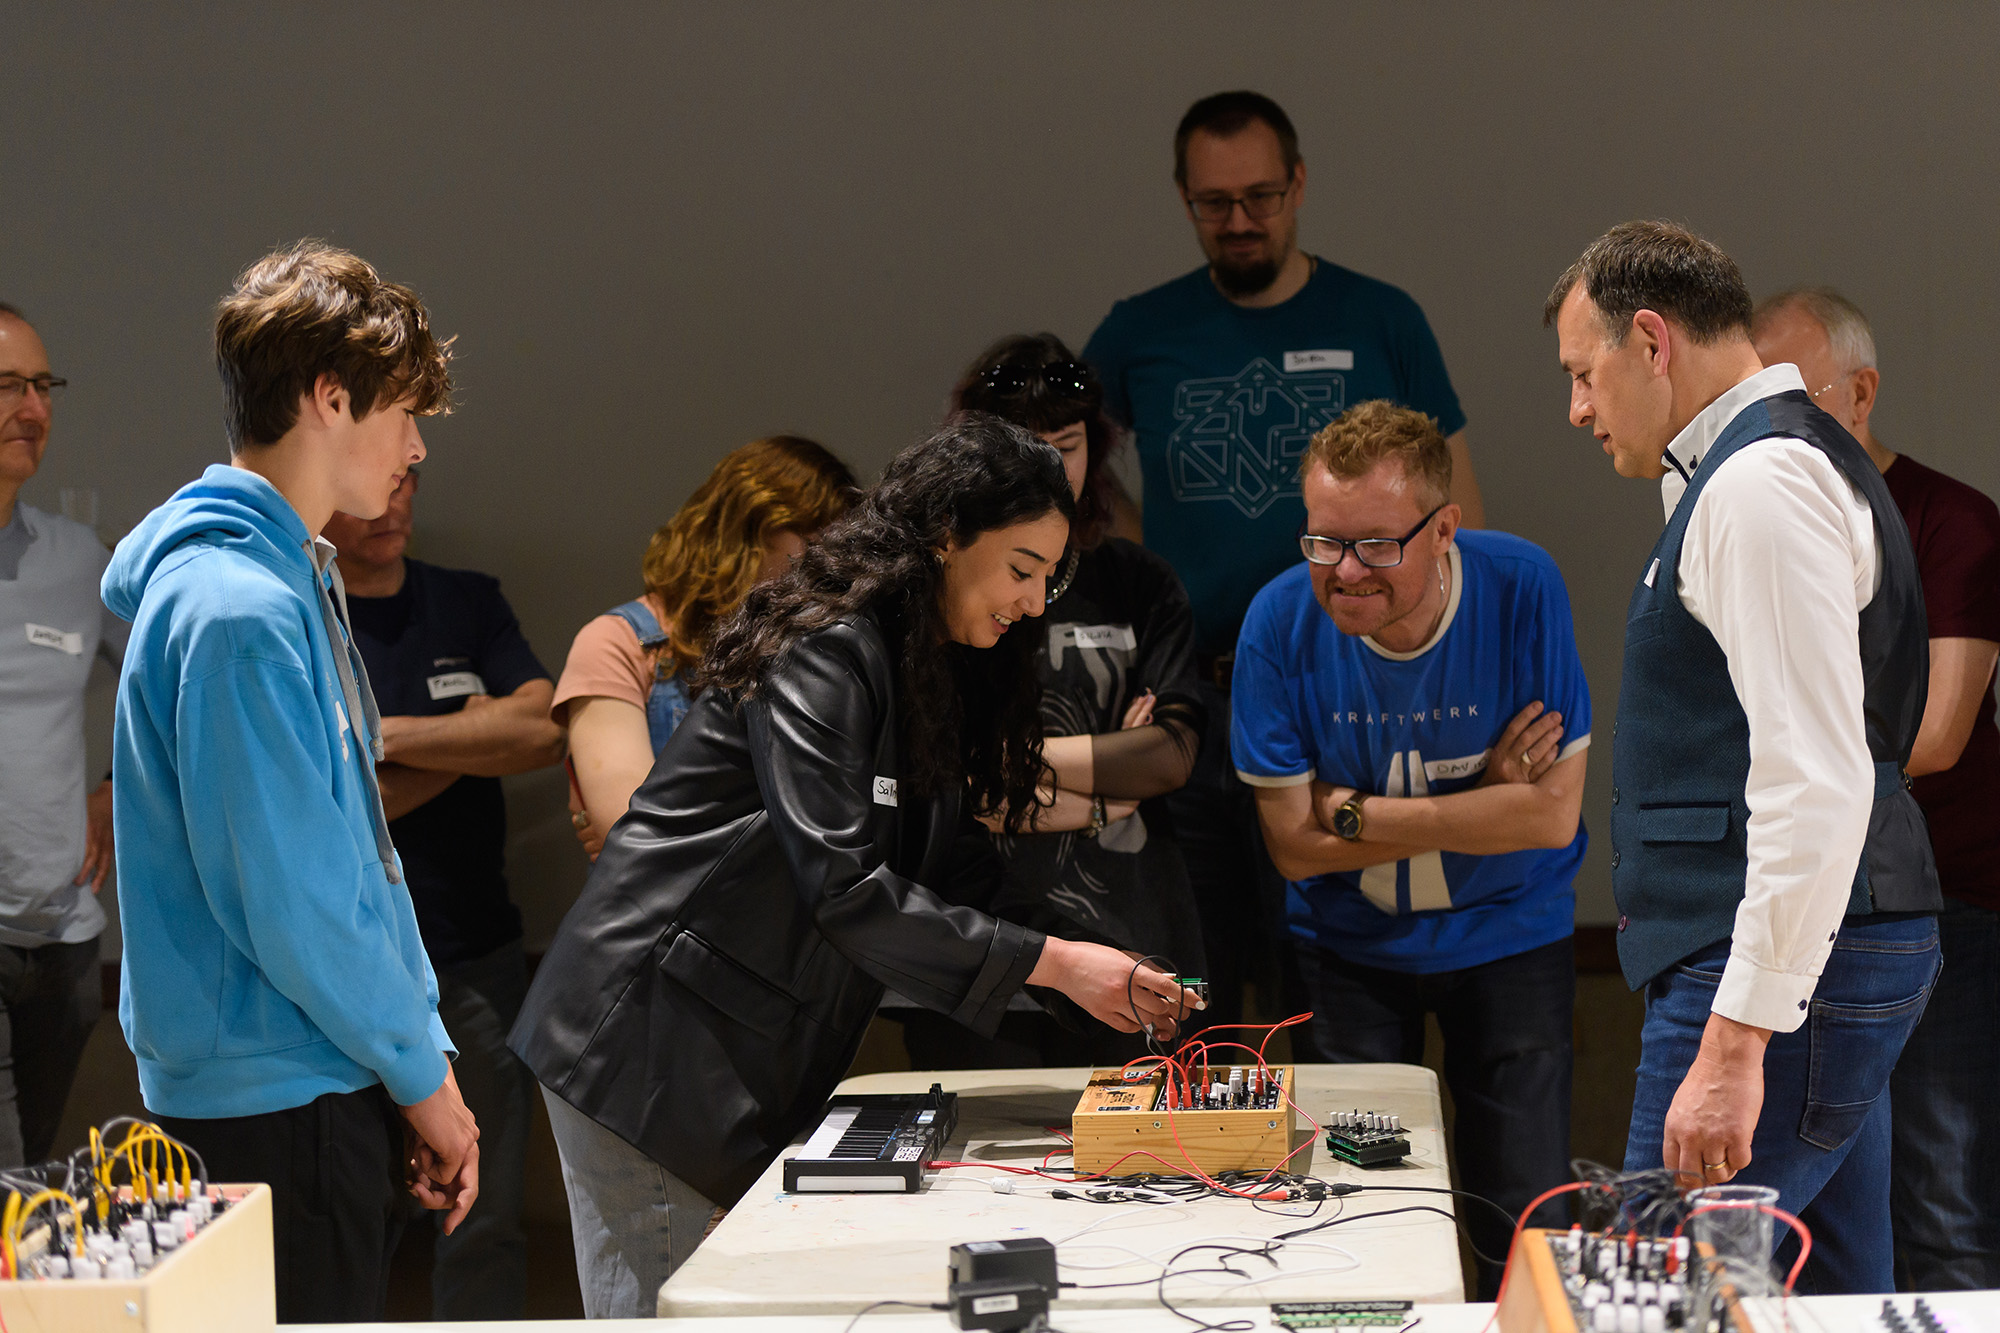 Rick Holt leading a modular synth workshop at the Herbert in 2022, with a group of people of all different ages gathered round watching a woman experimenting with a modular synth 